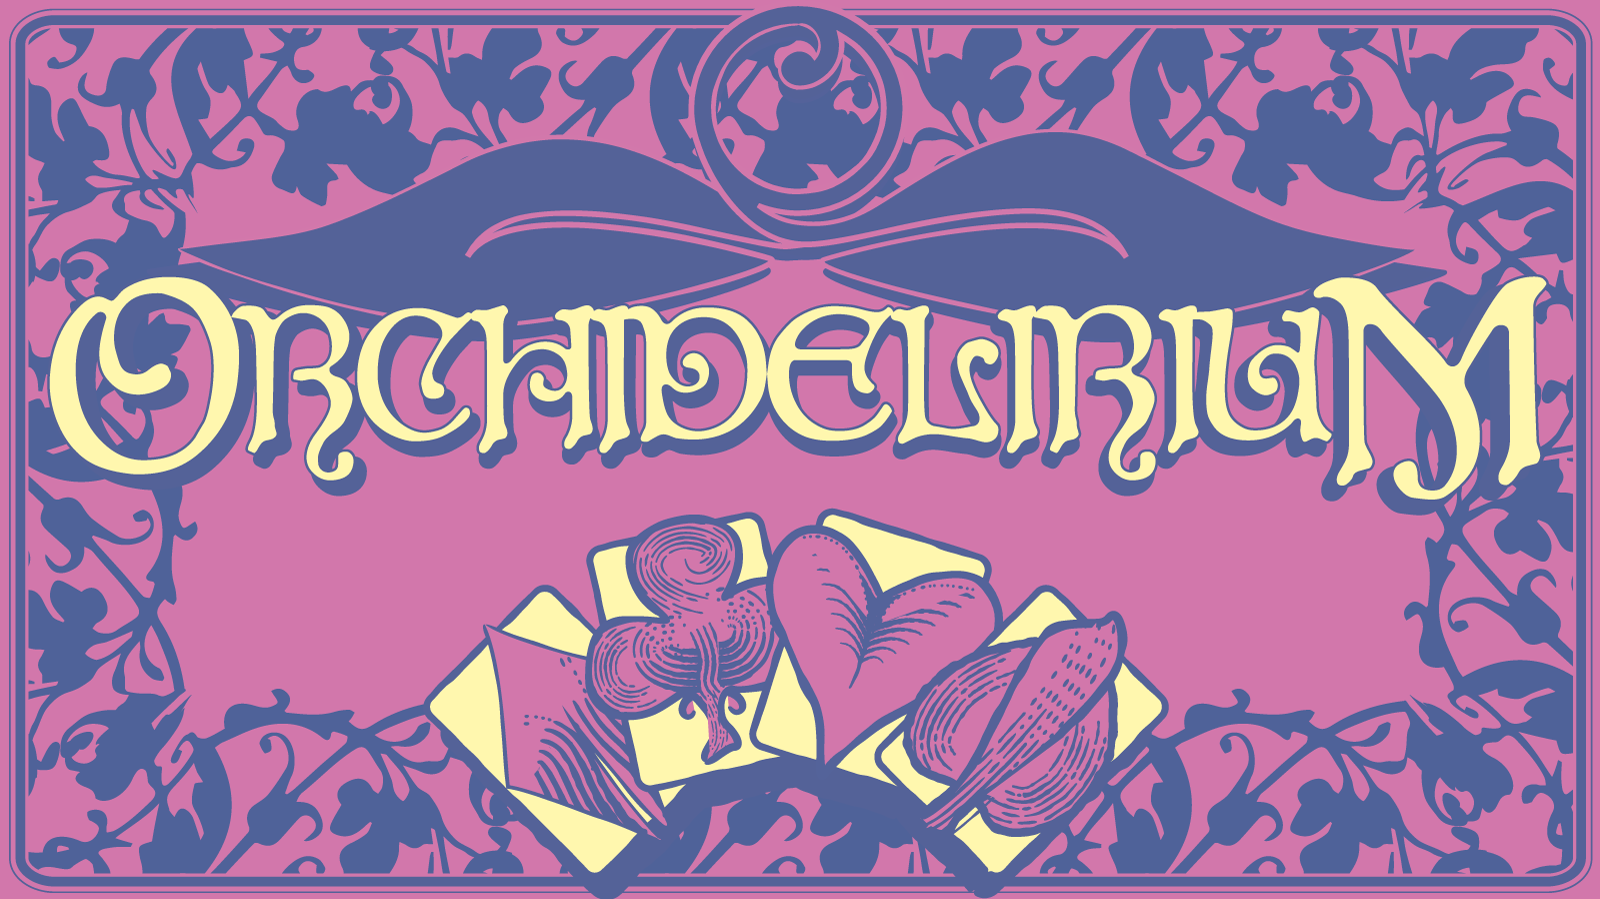 Floral border with playing cards with the word Orchidelirium in a curling typeface